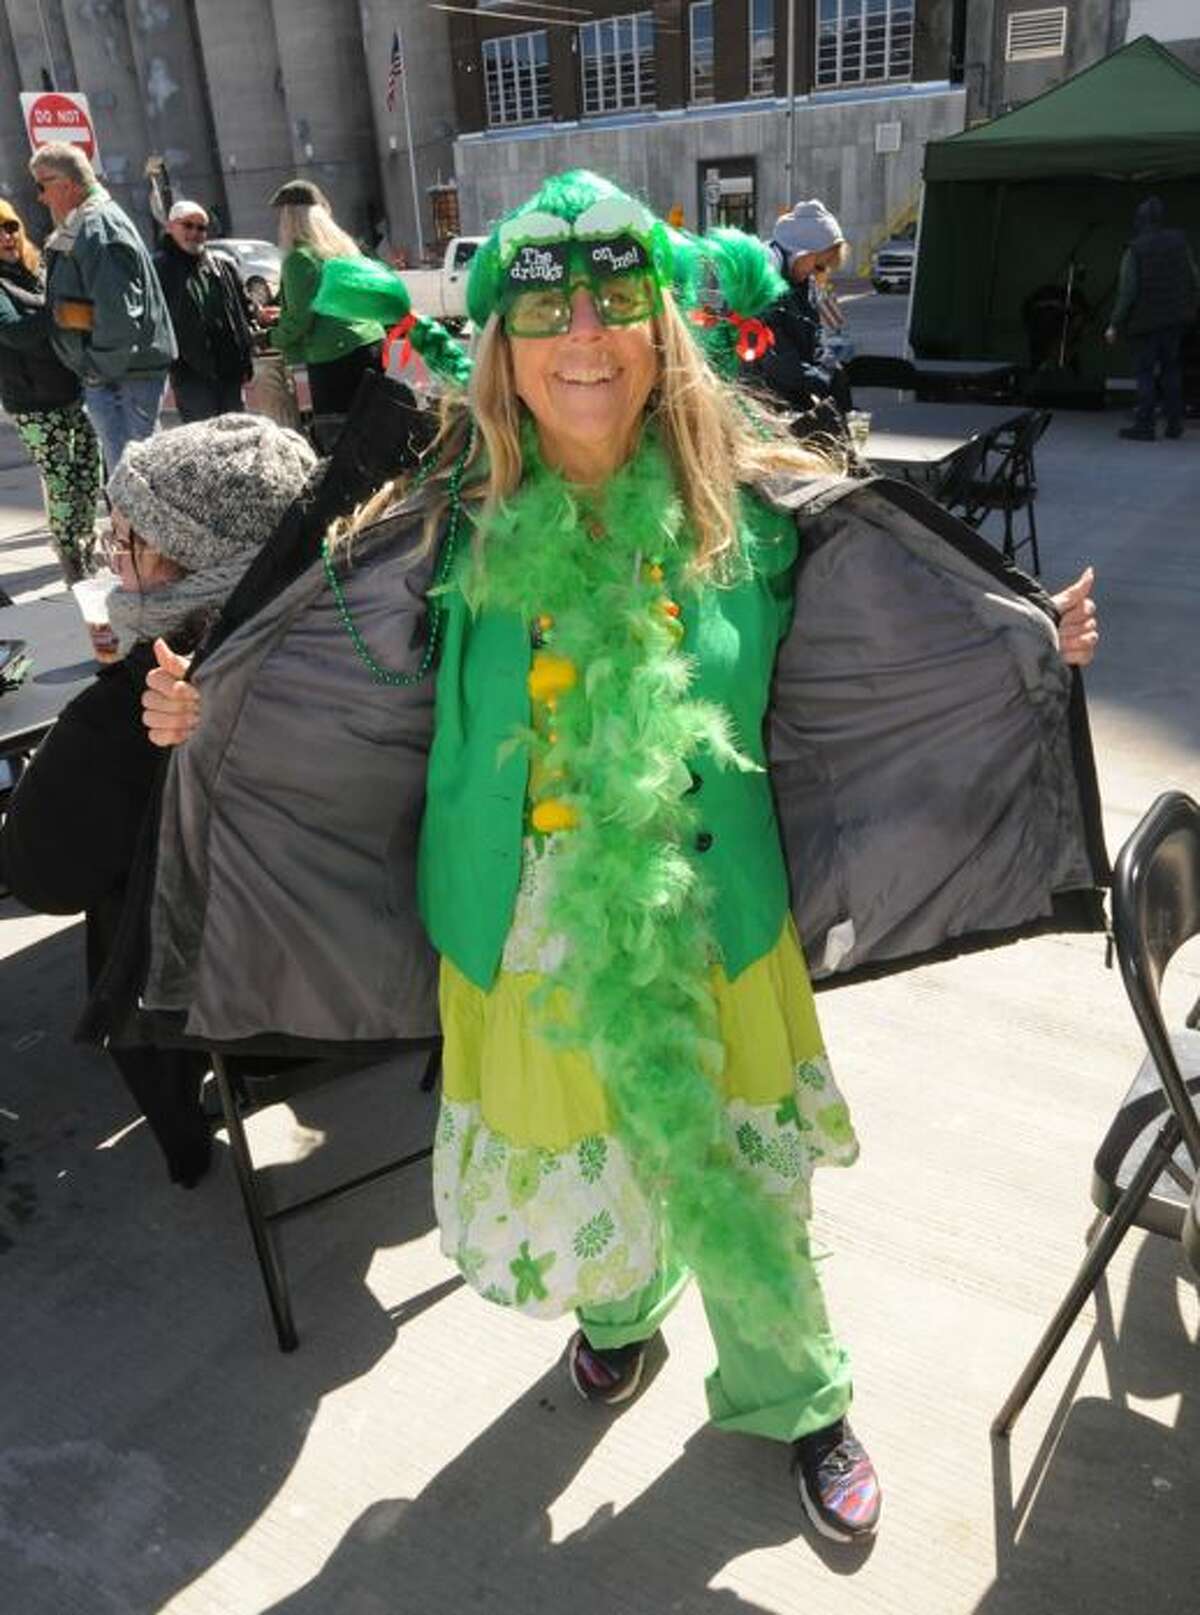 Nancy Marlow of Godfrey shows off her green during the St. Pat's Pub Crawl Saturday in Alton. “I’m McMarlow today. Or is it O’Marlow? I don’t know, but everybody is Irish today, ” she said.